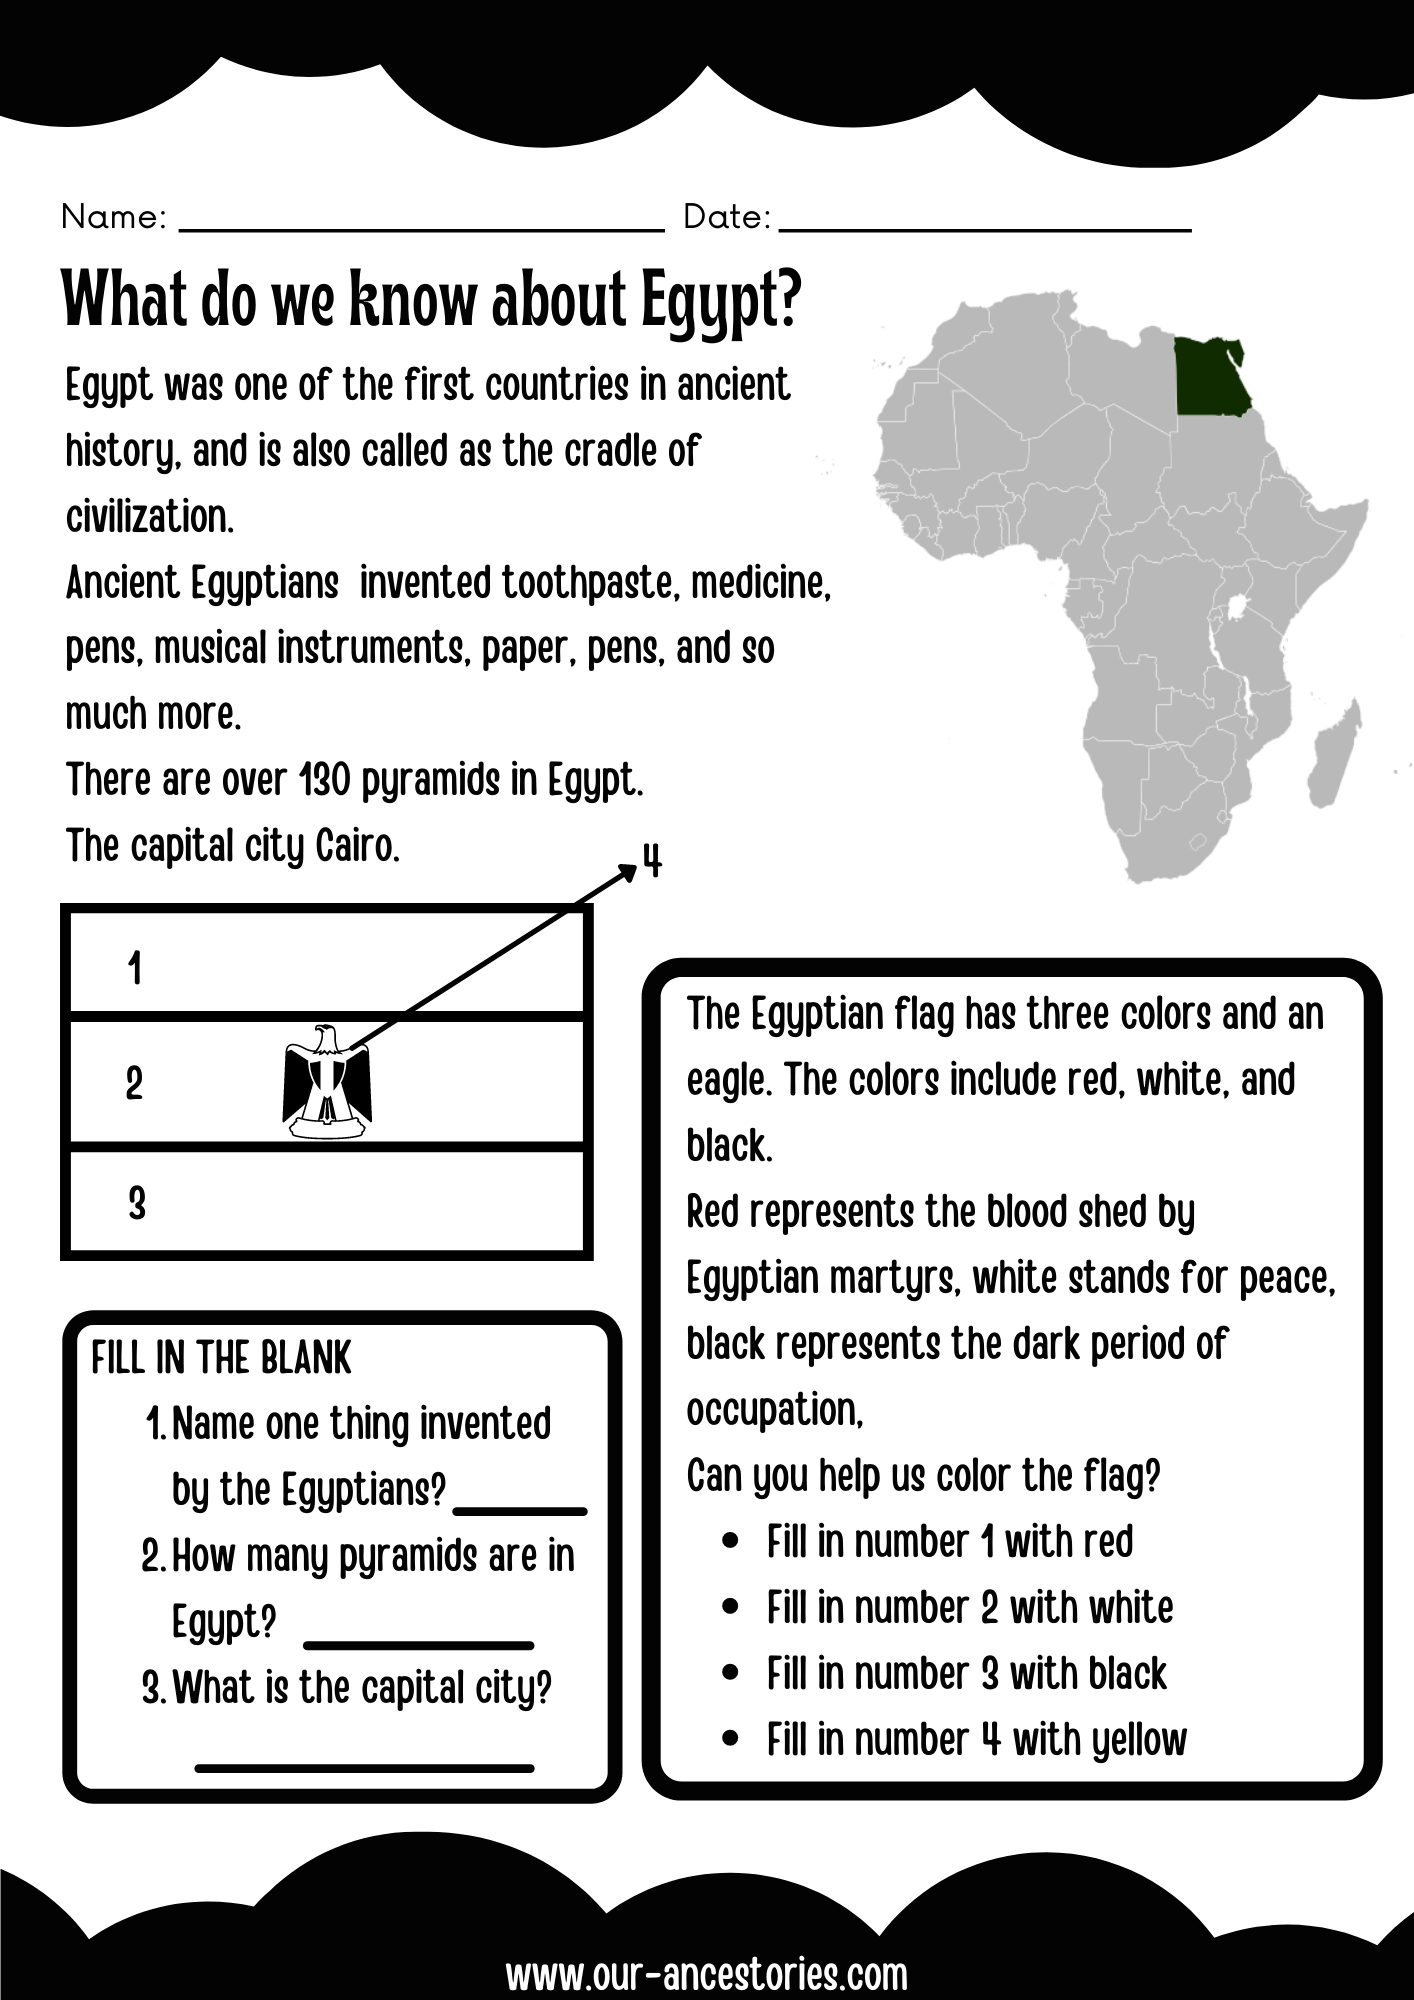 Our Ancestories - Egypt Country Profile - Free Worksheets